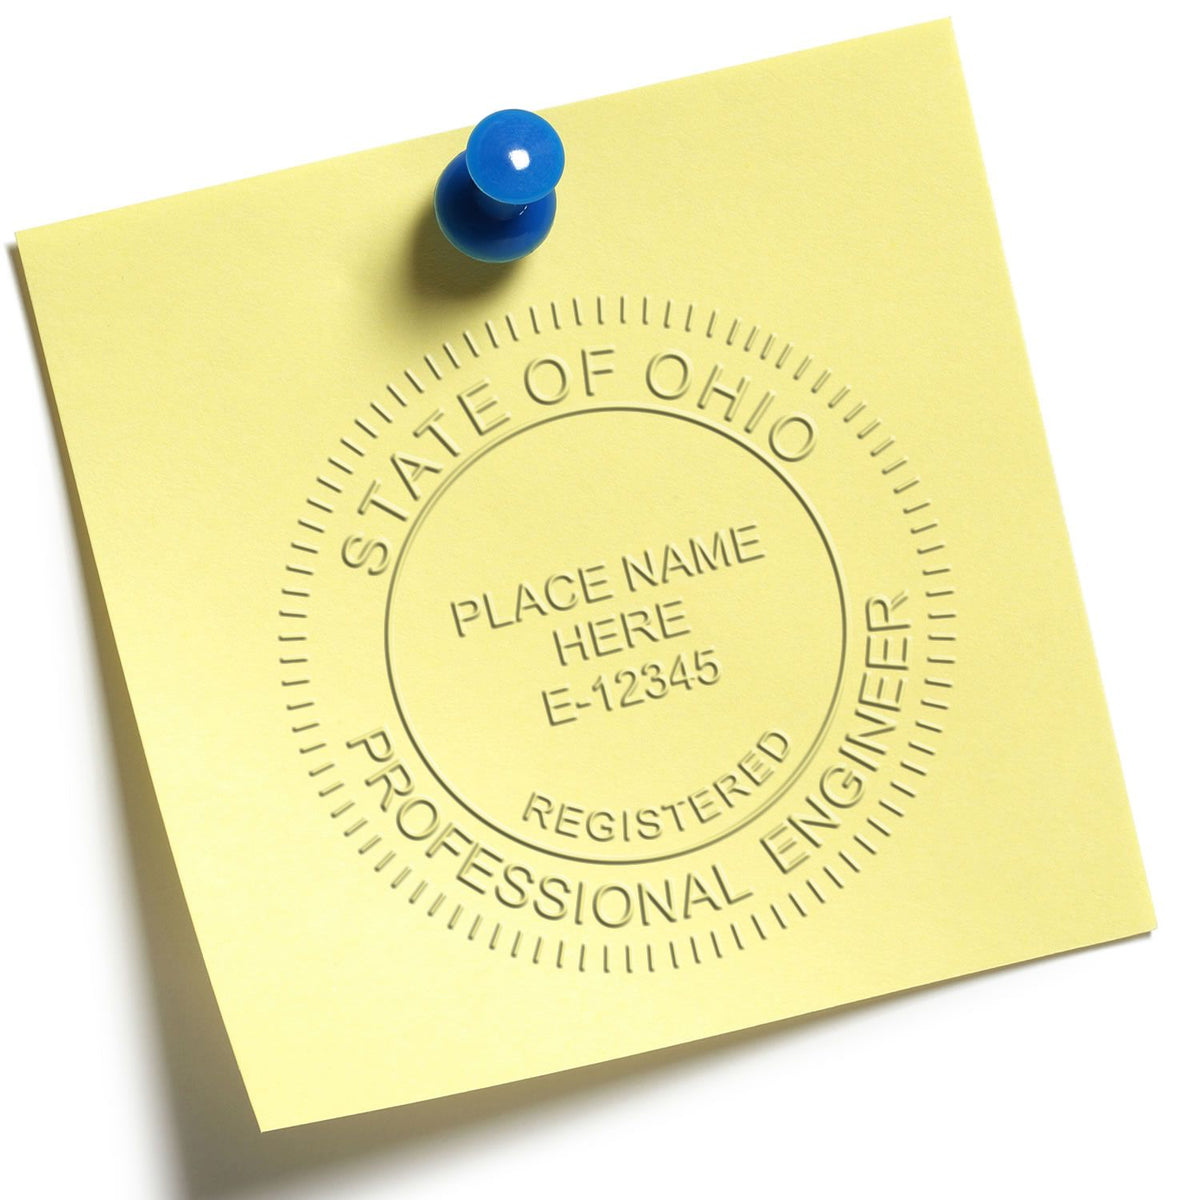 An in use photo of the Gift Ohio Engineer Seal showing a sample imprint on a cardstock